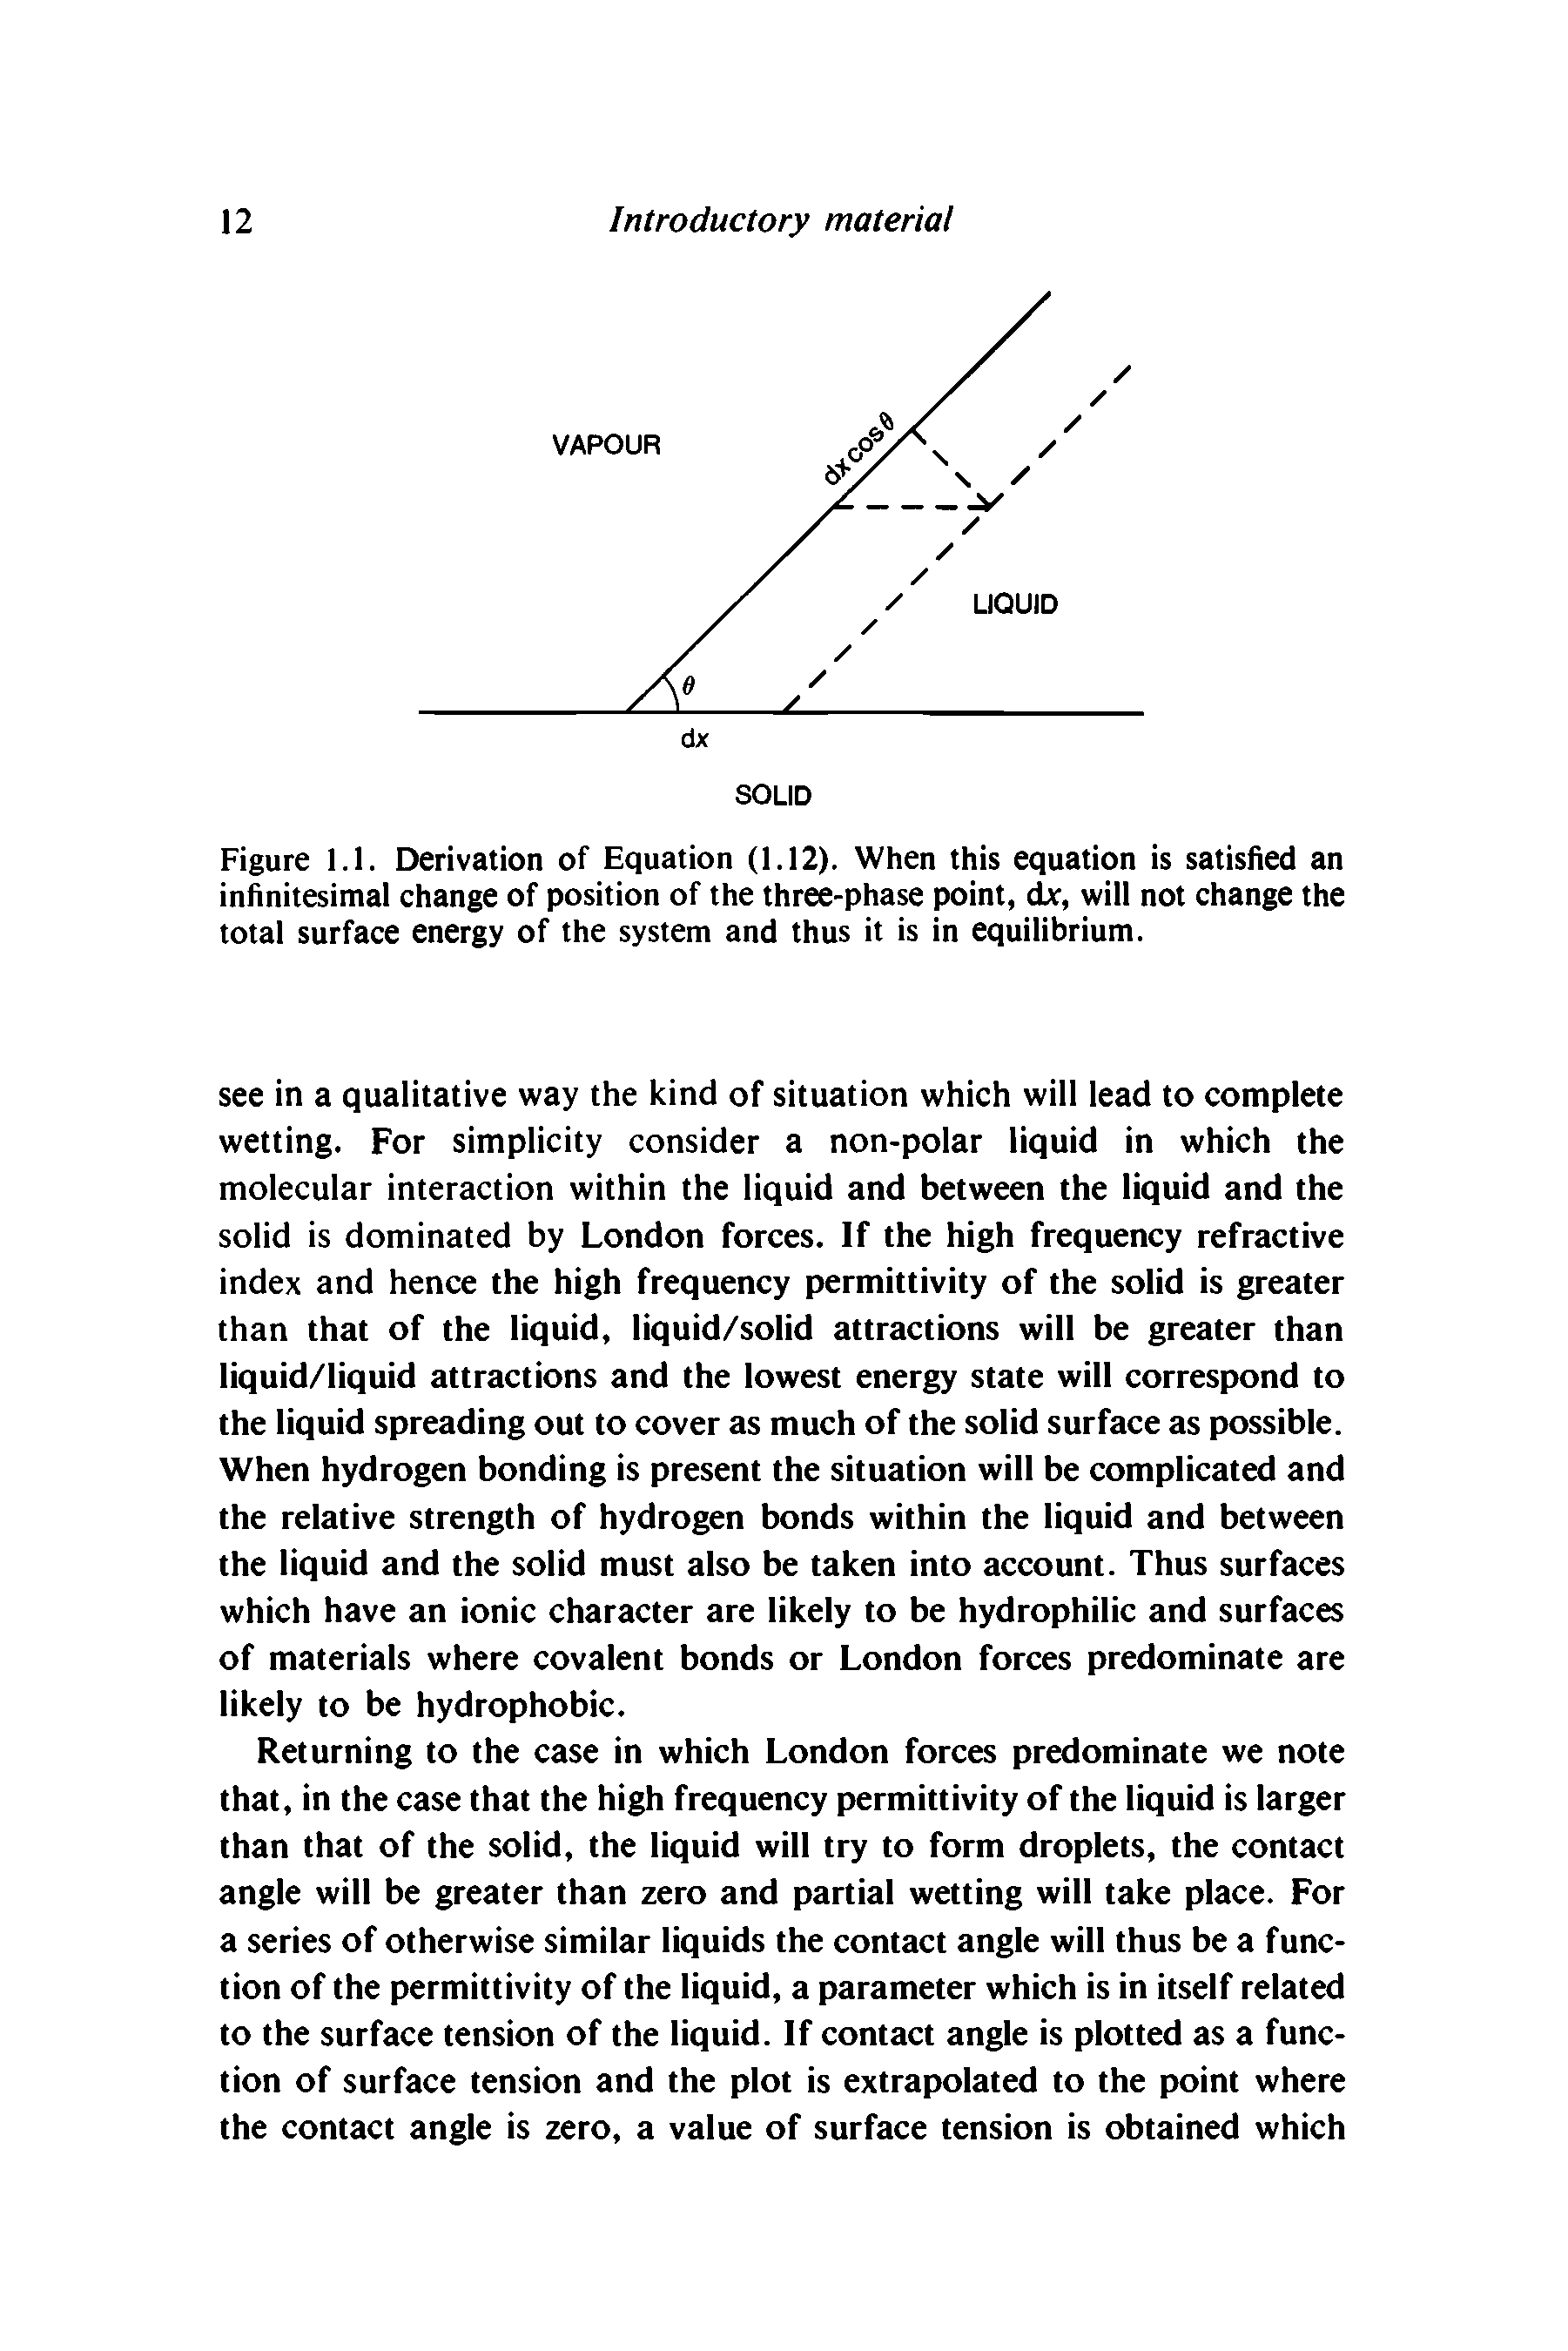 Figure 1.1. Derivation of Equation (1.12). When this equation is satisfied an infinitesimal change of position of the three-phase point, dx, will not change the total surface energy of the system and thus it is in equilibrium.